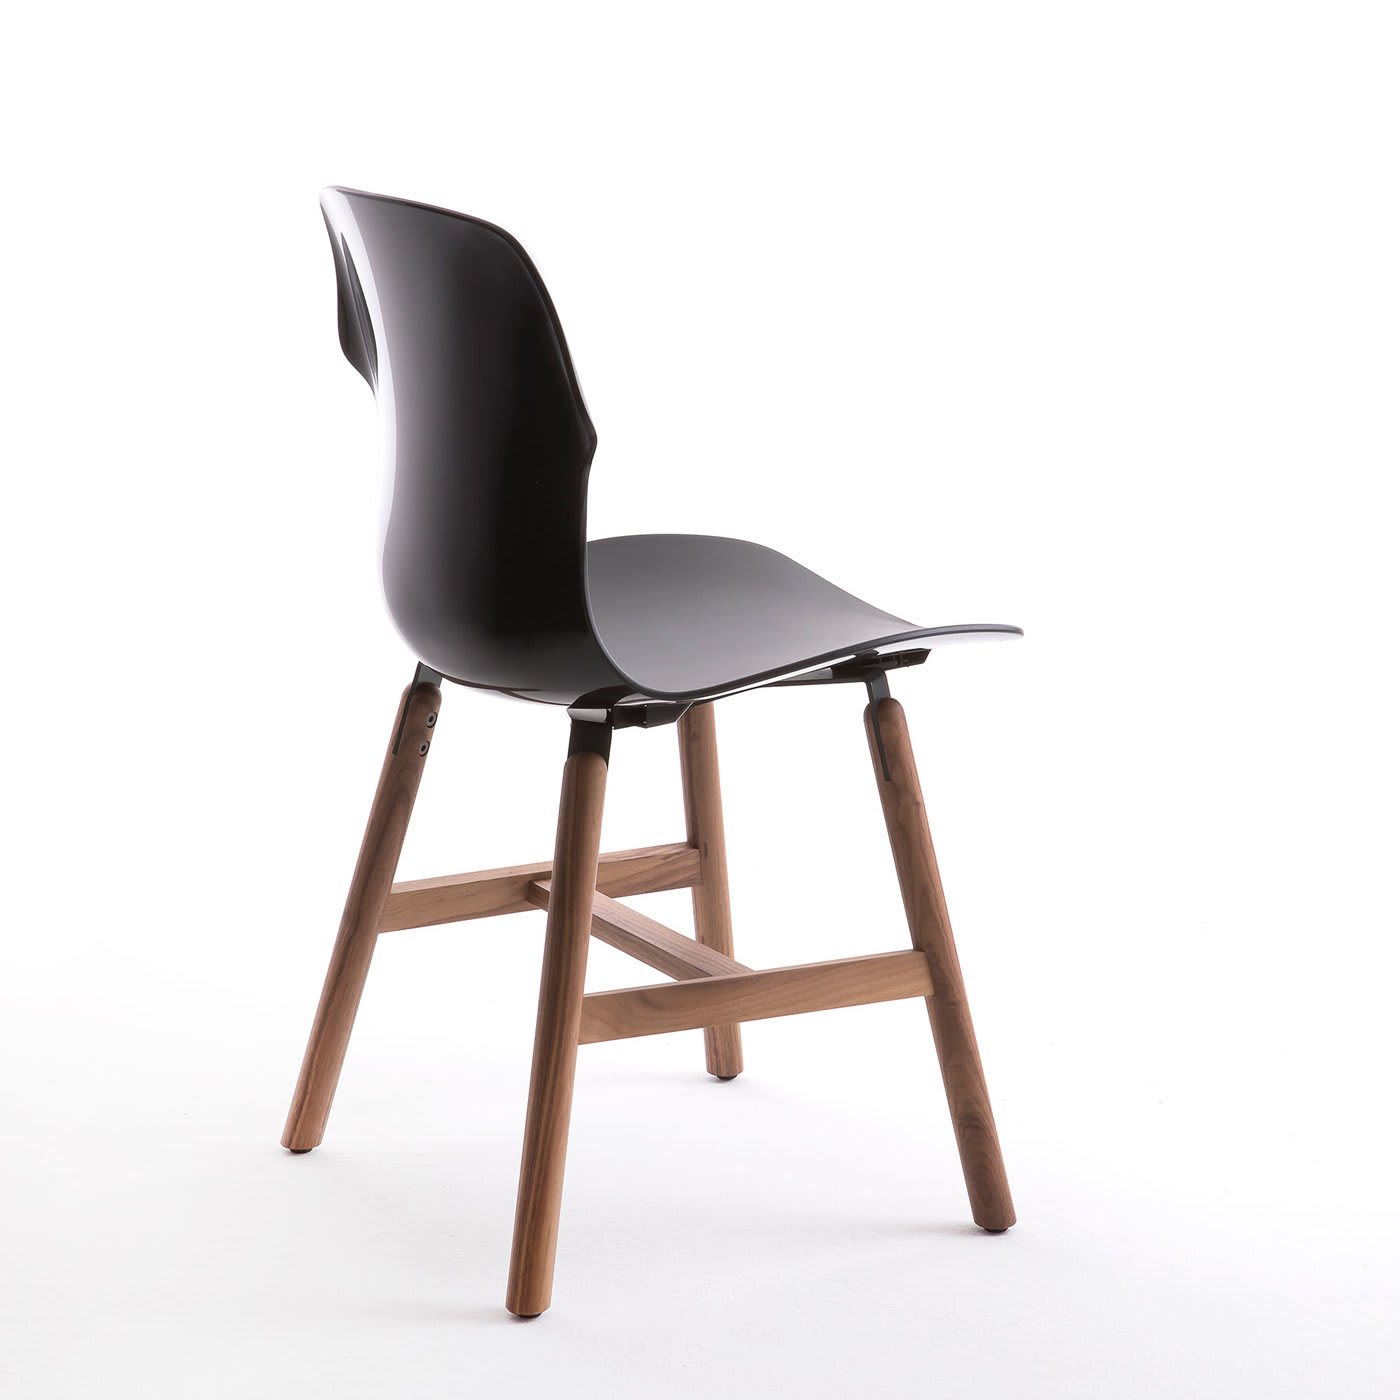 Stereo Set of 2 Black Chairs by Luca Nichetto - Casamania